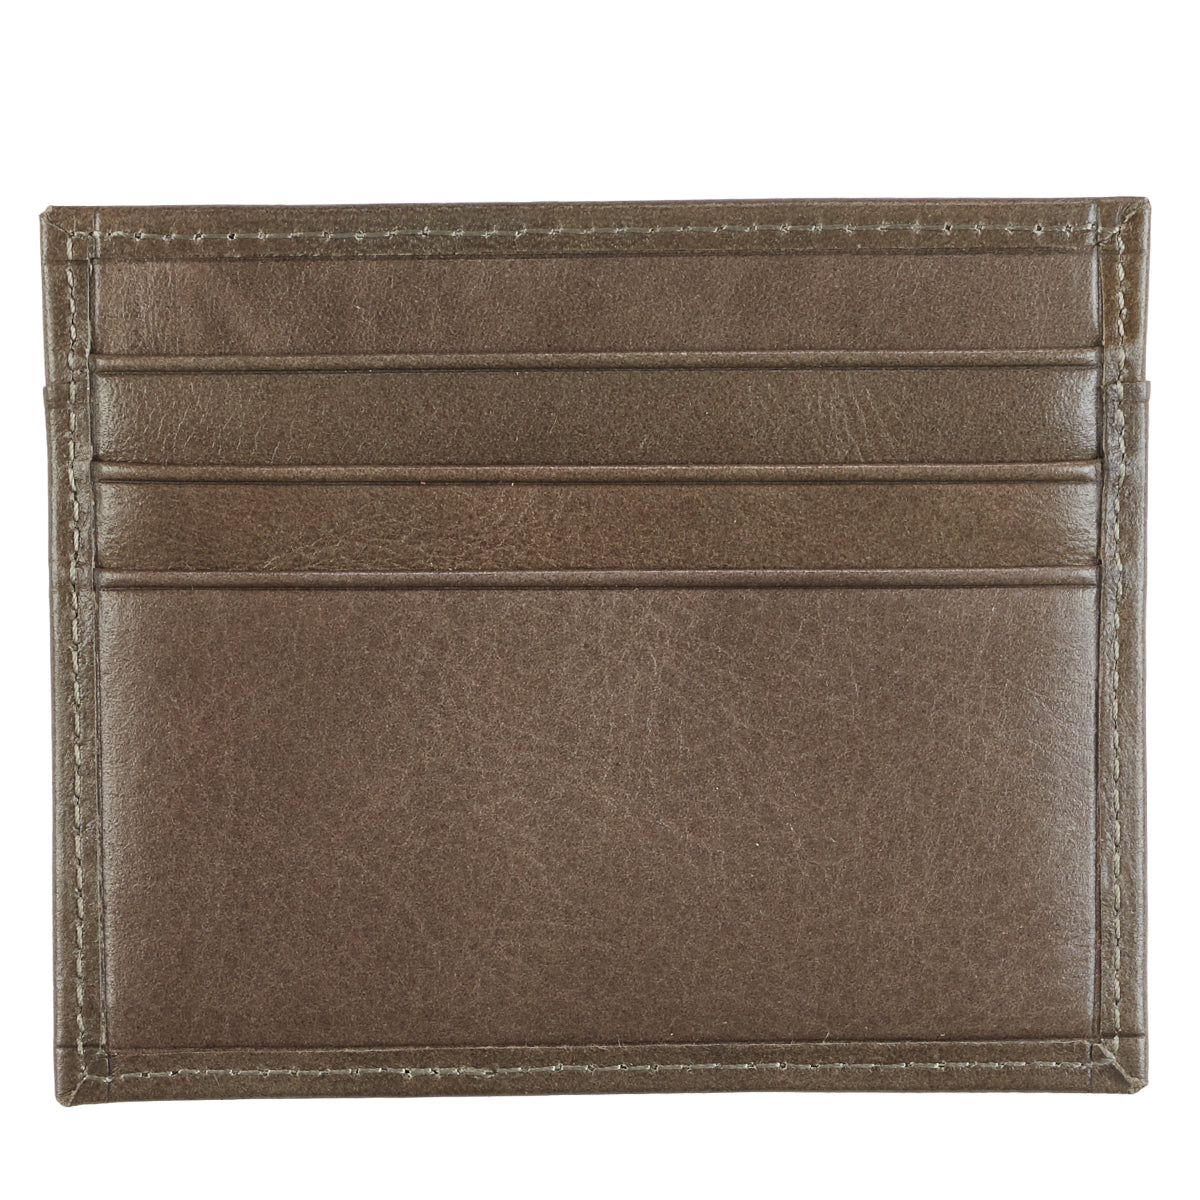 Image of John 3:16 Cross Leather Wallet other